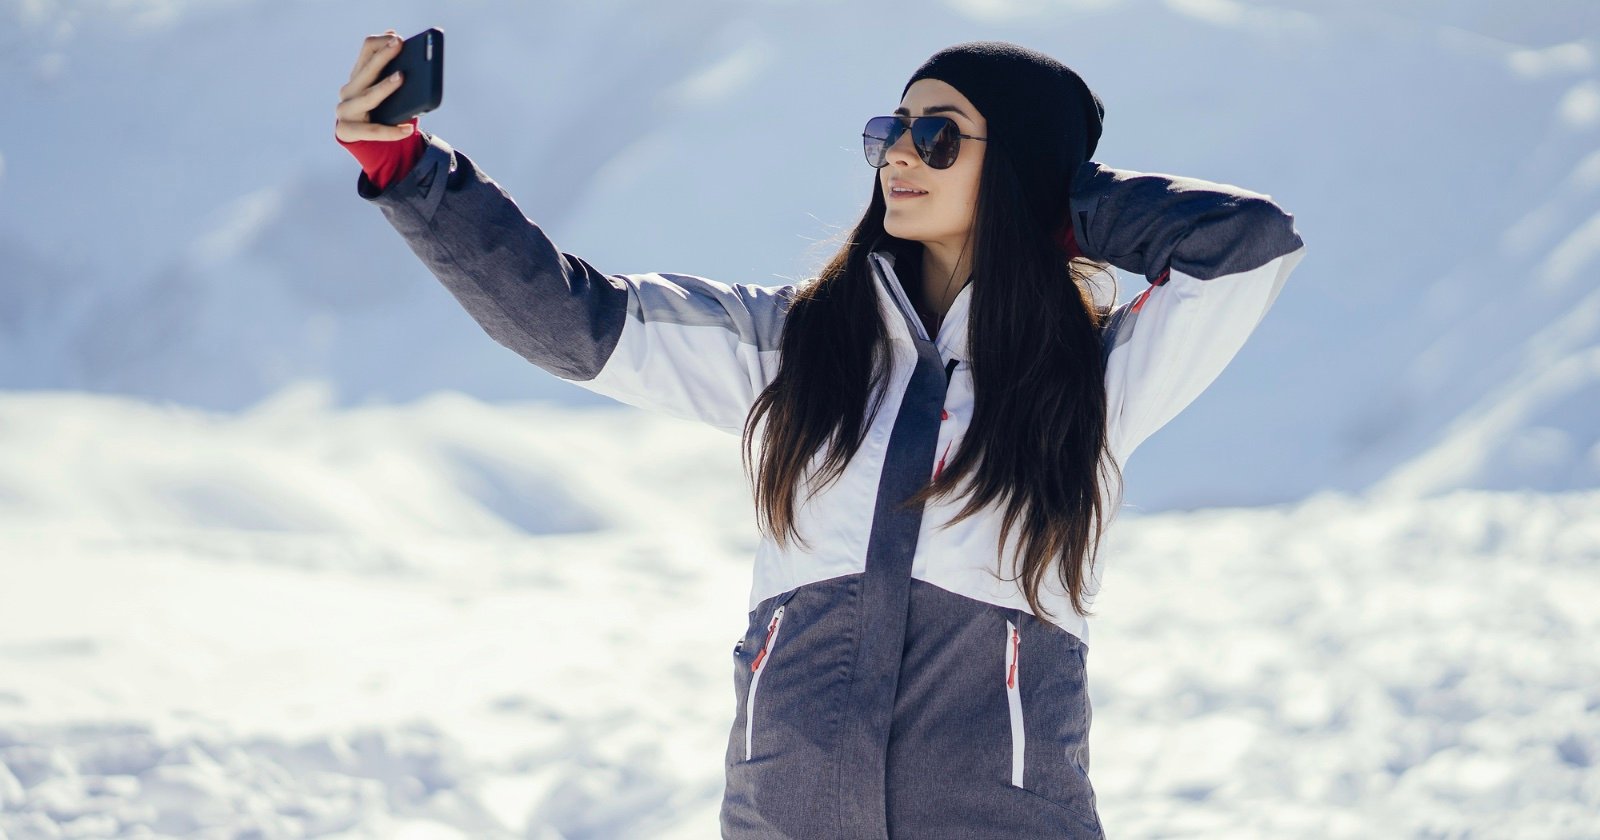  ski resort owner sues over influencers taking photos 